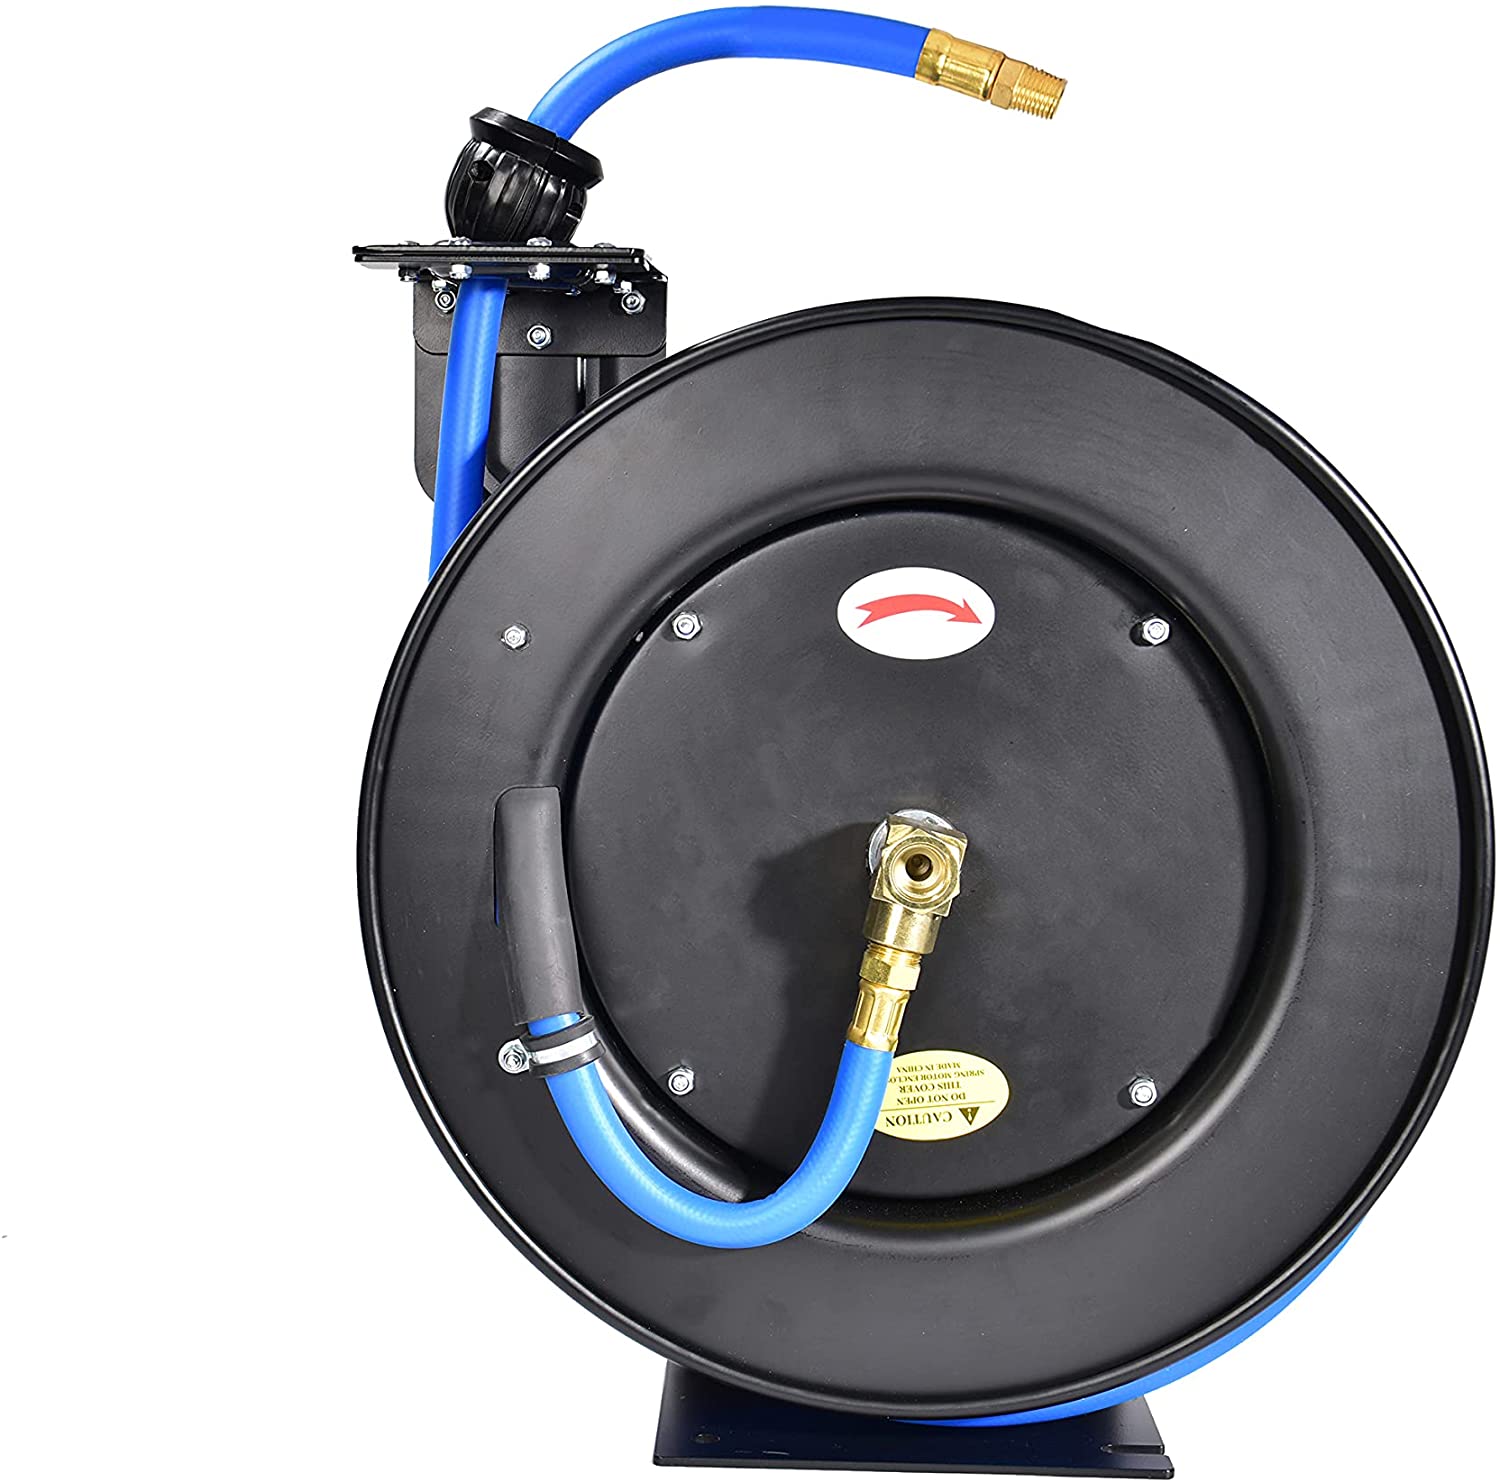 50+4.6 FT Retractable Air Compressor Hose Reel Holder Auto Rewind Wall  Mounted~ 